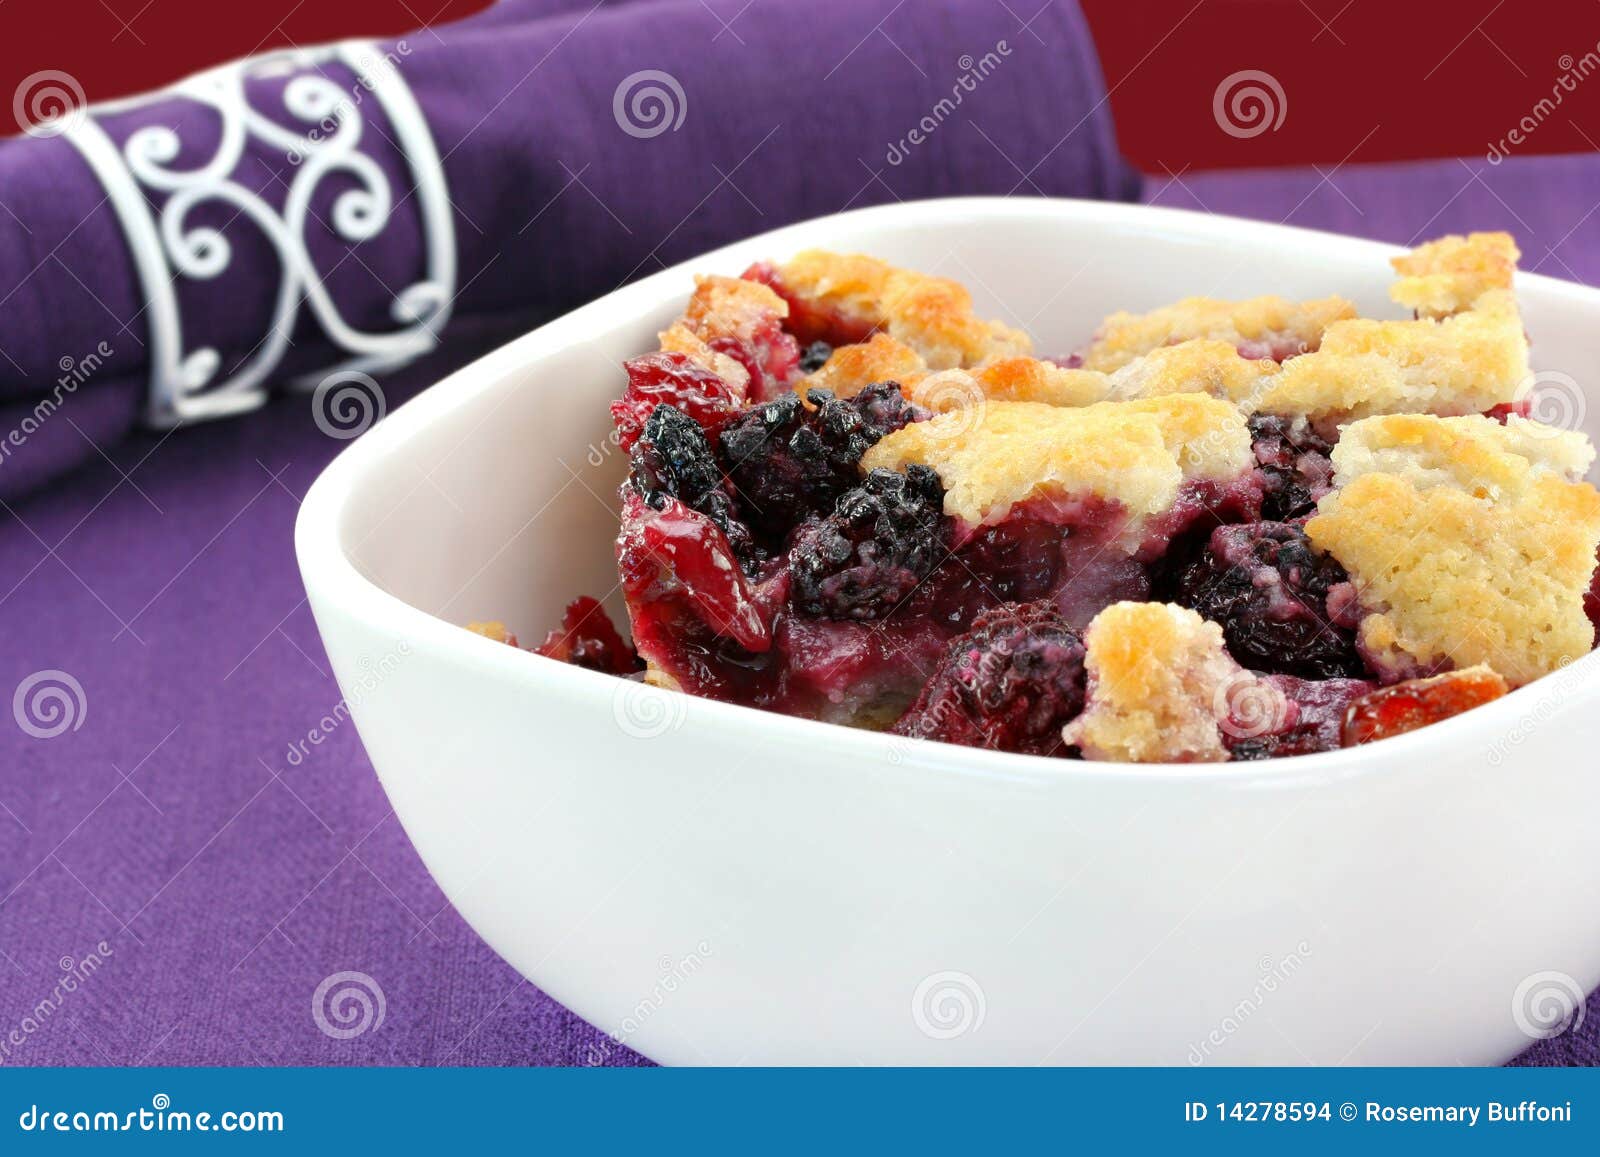 berry cobbler in a bowl.